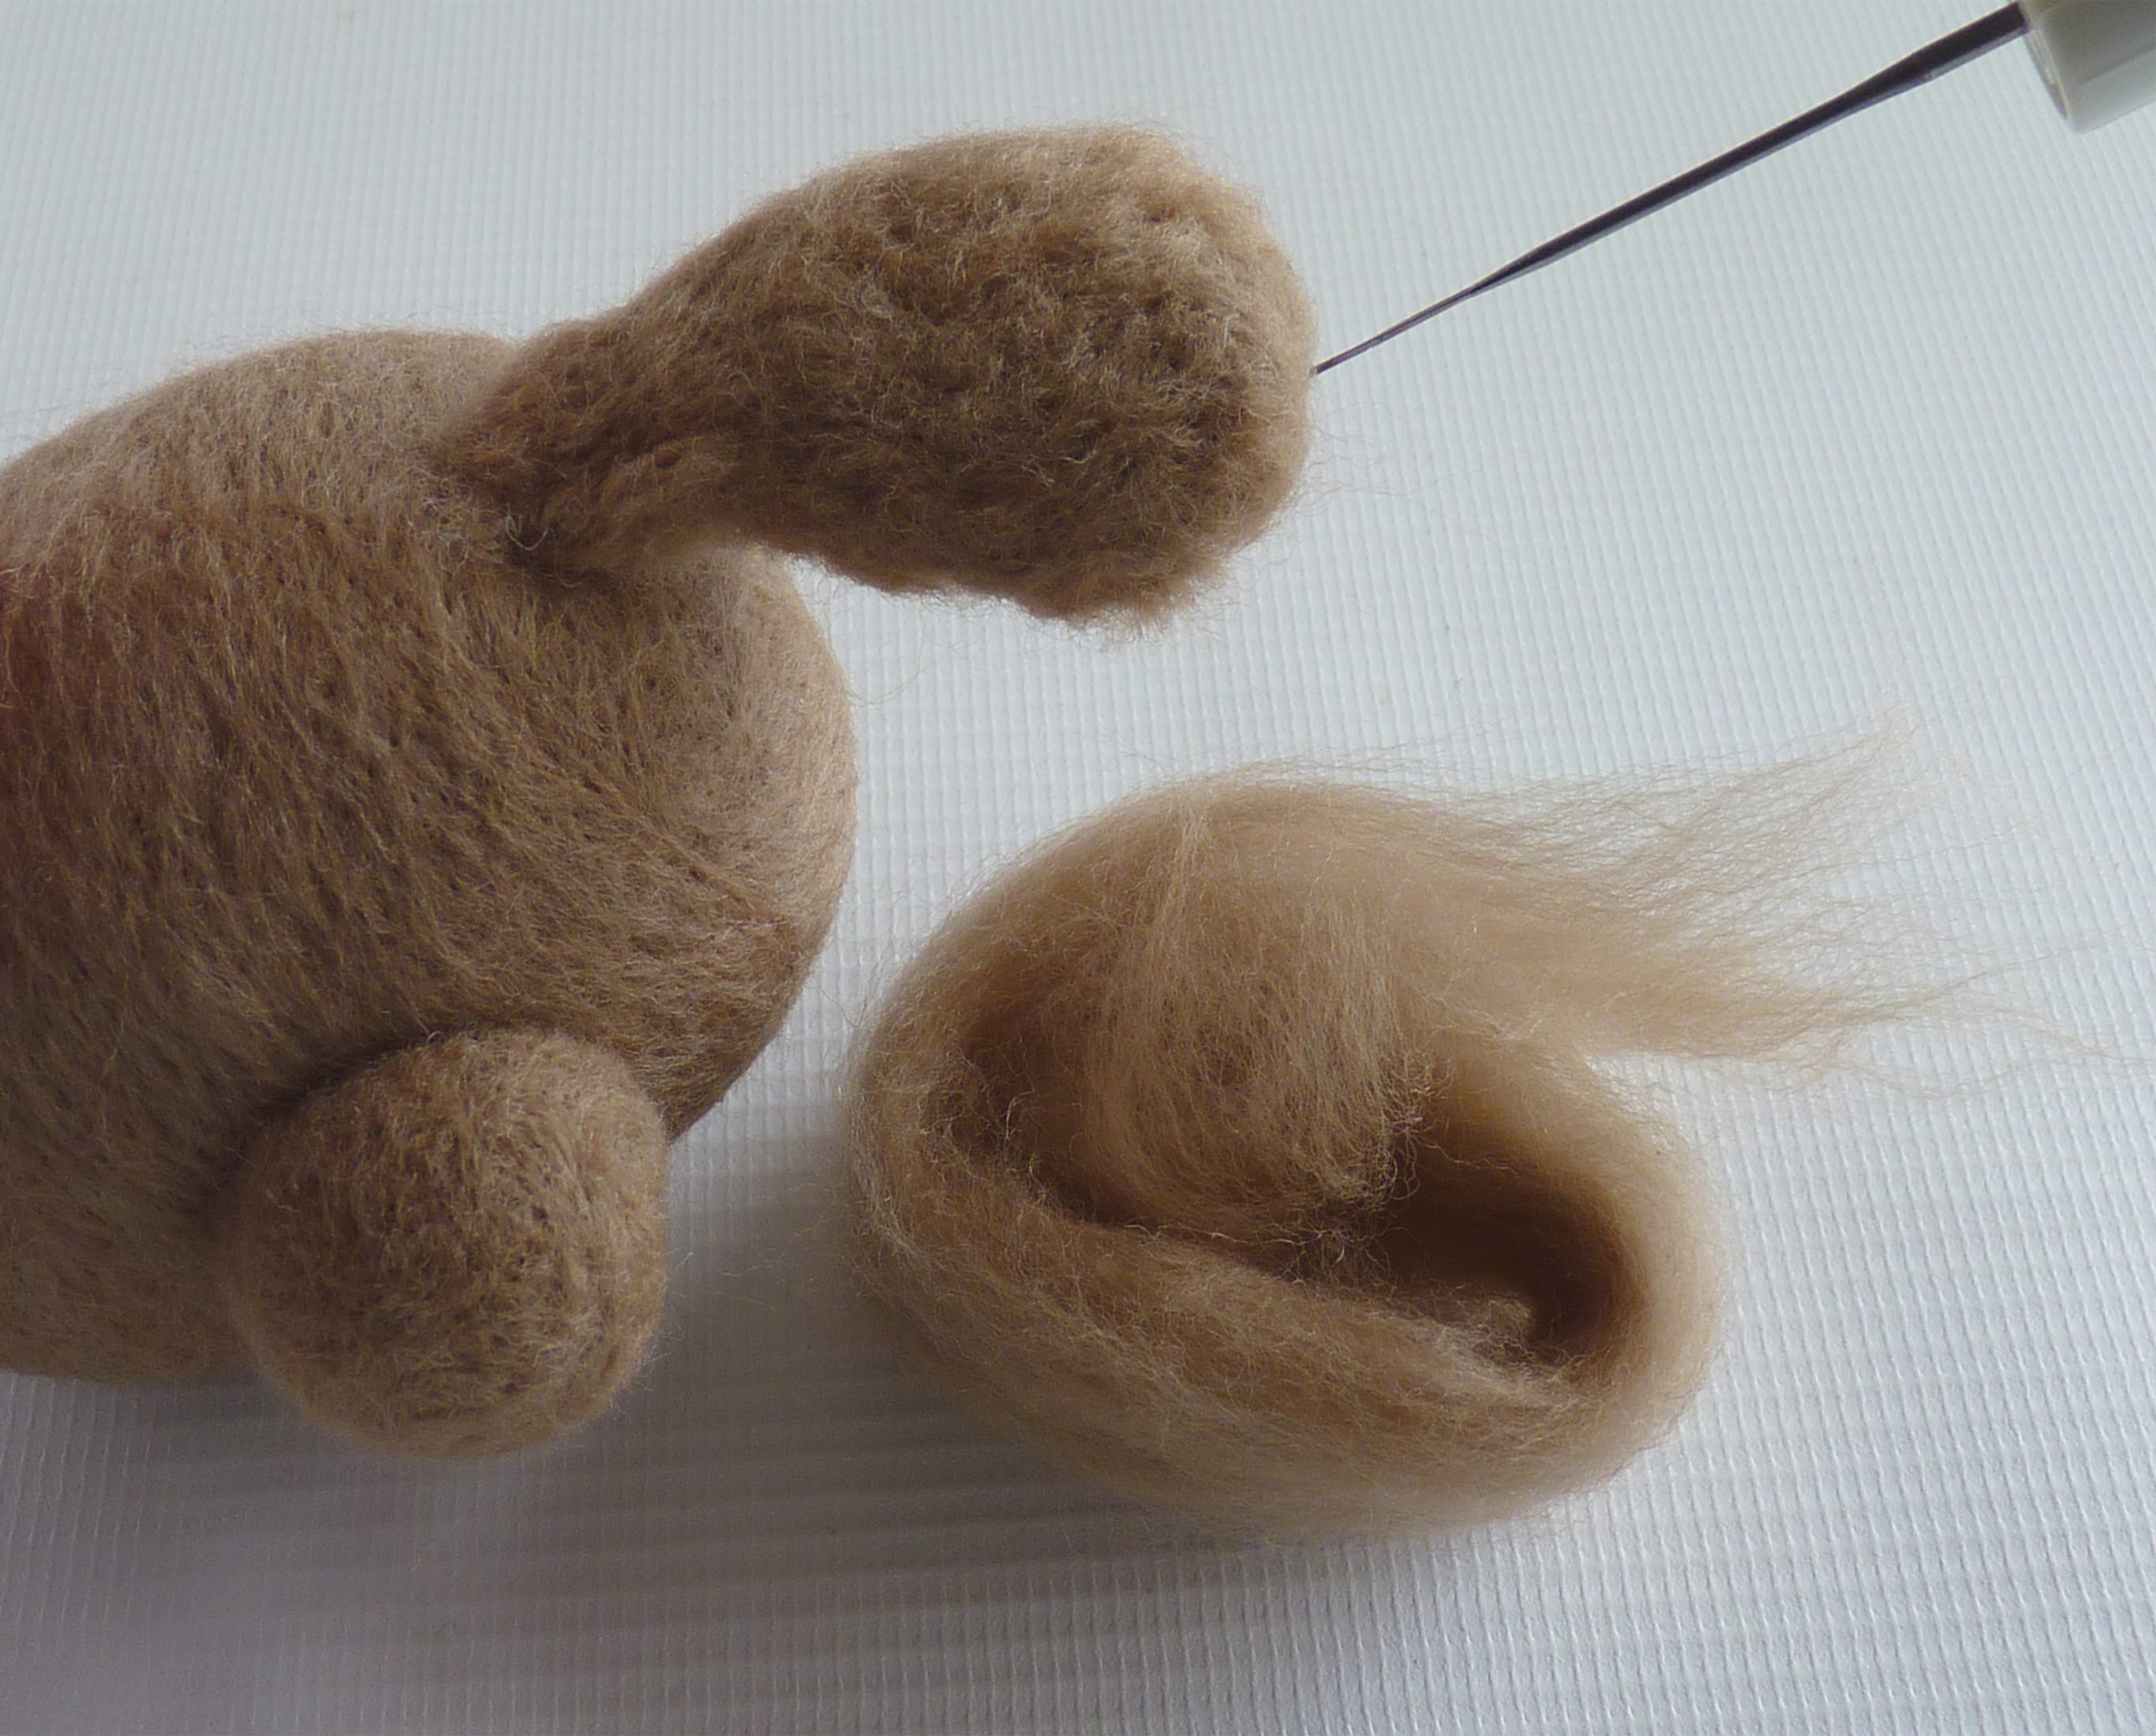 How to make needle felted animals – step 6